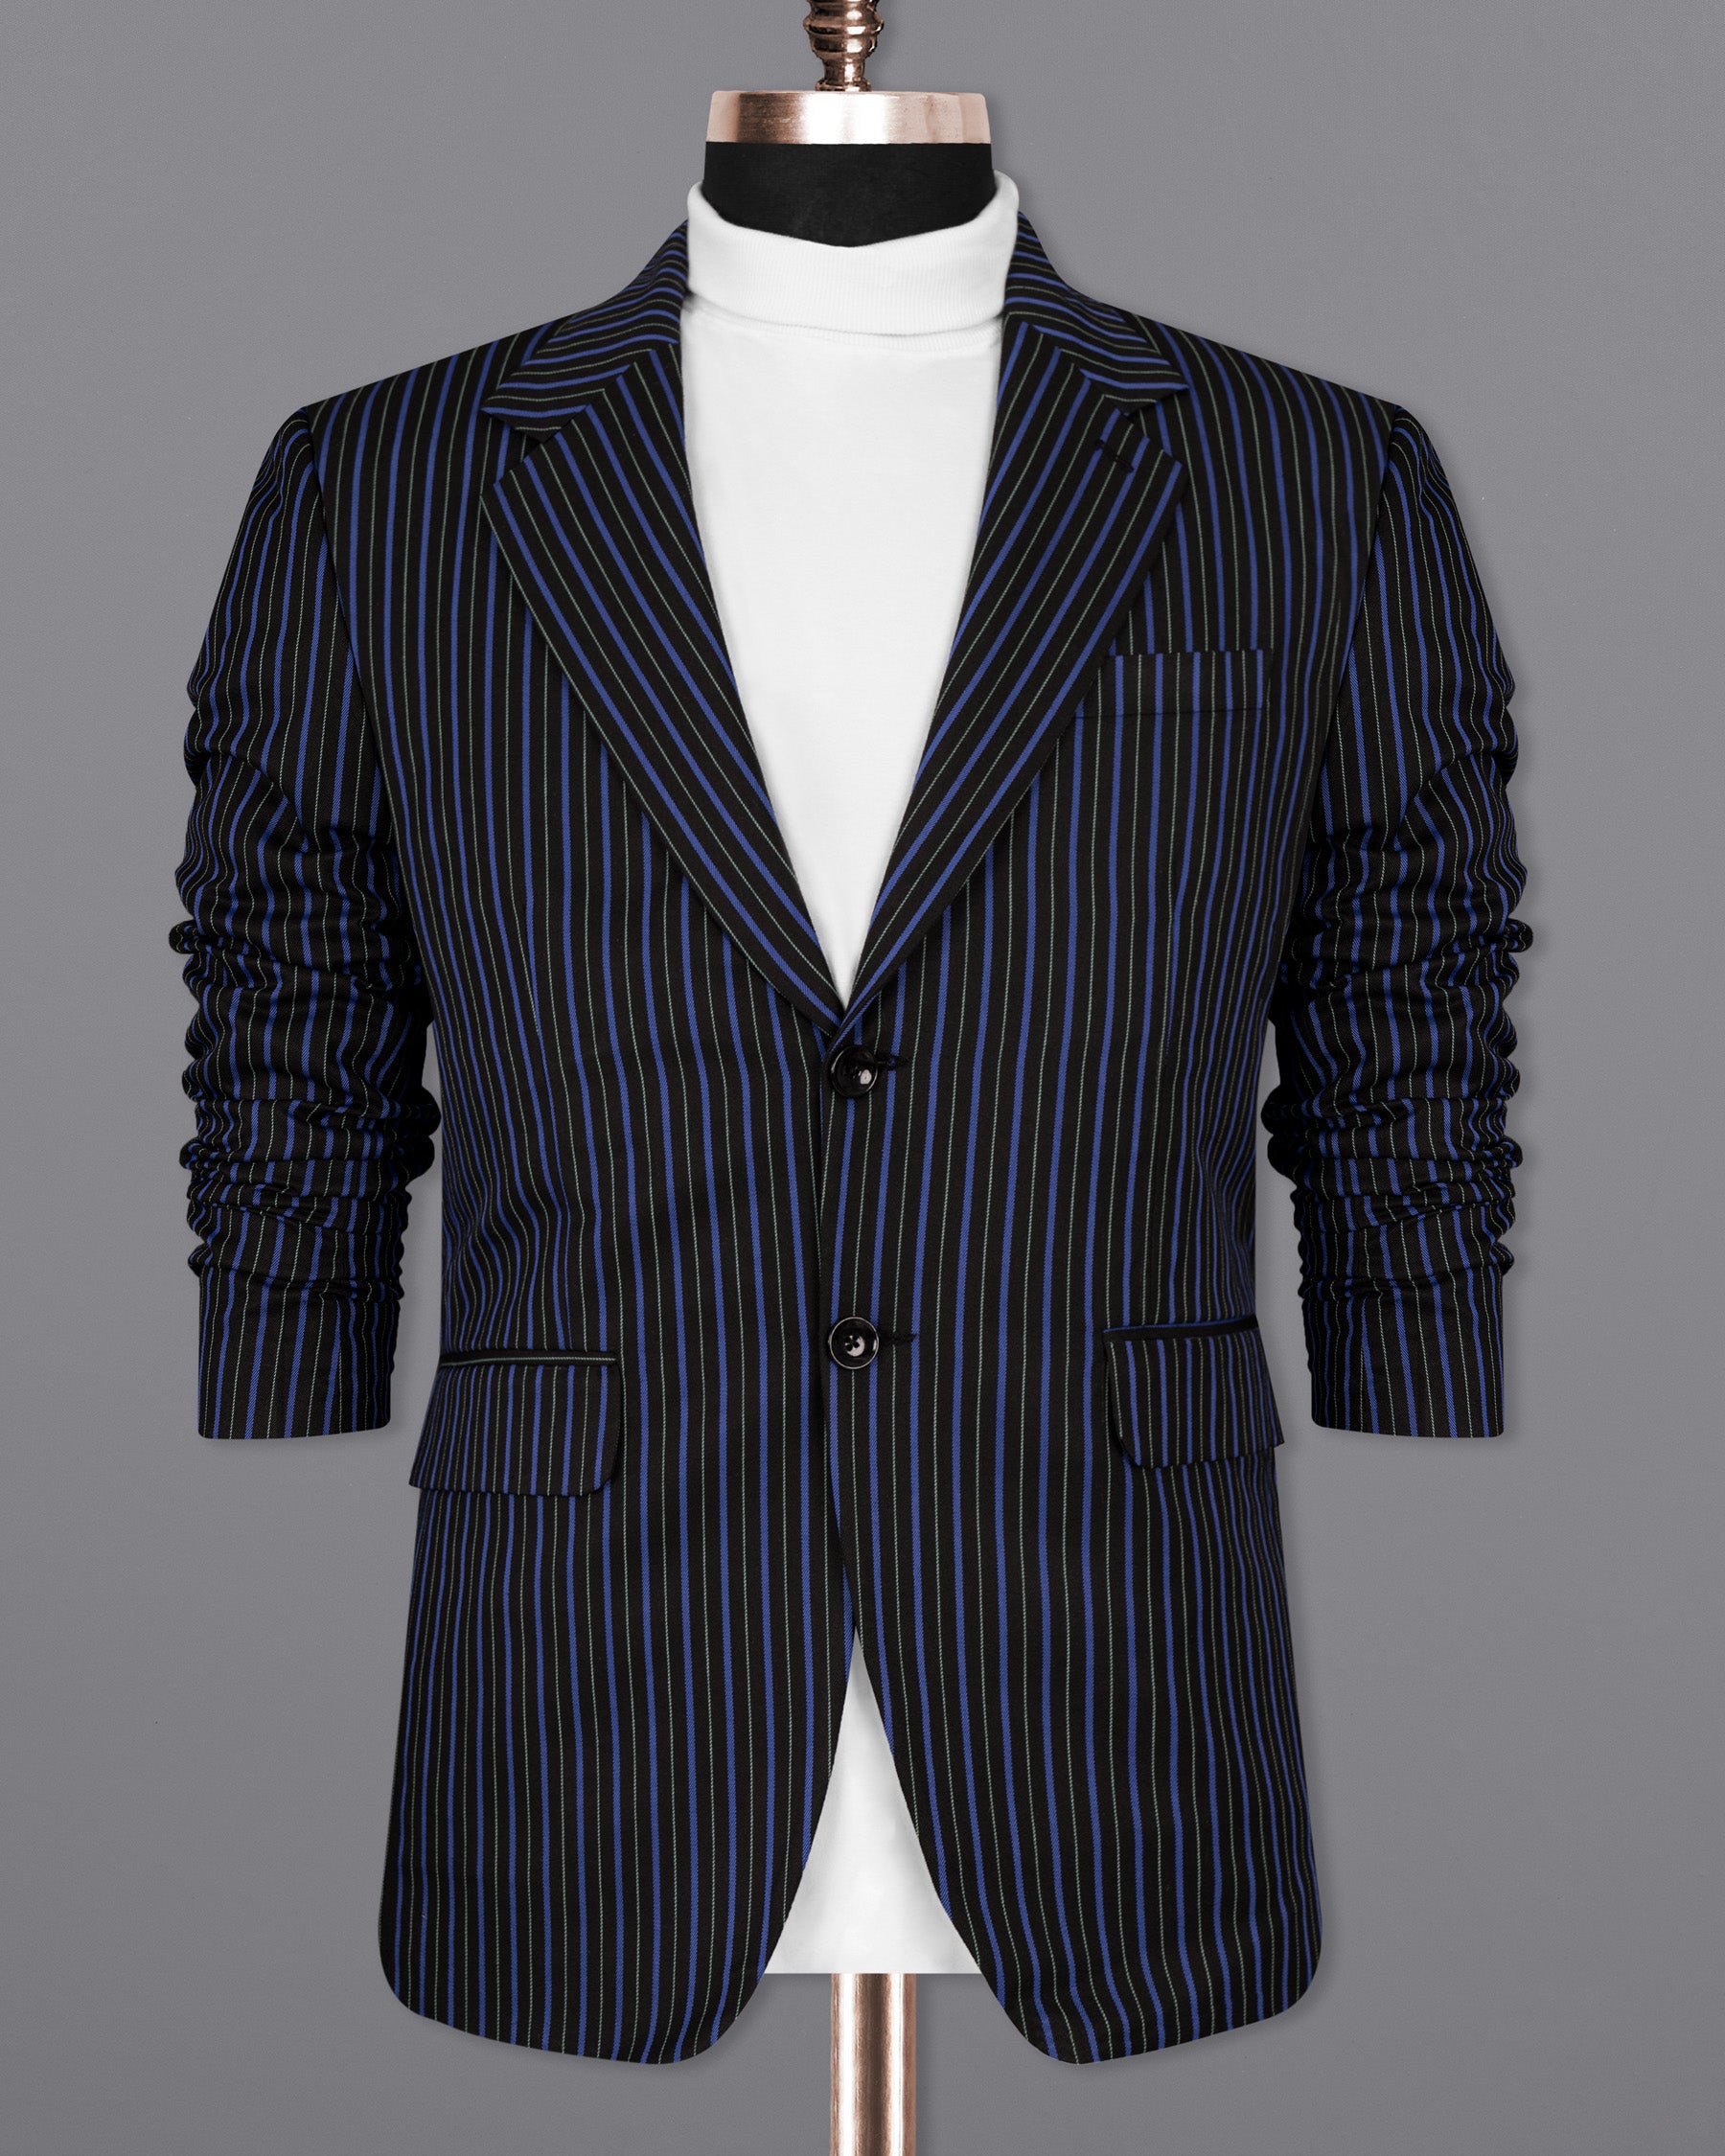 Jade Black and Mariner Blue Striped Woolrich Suit